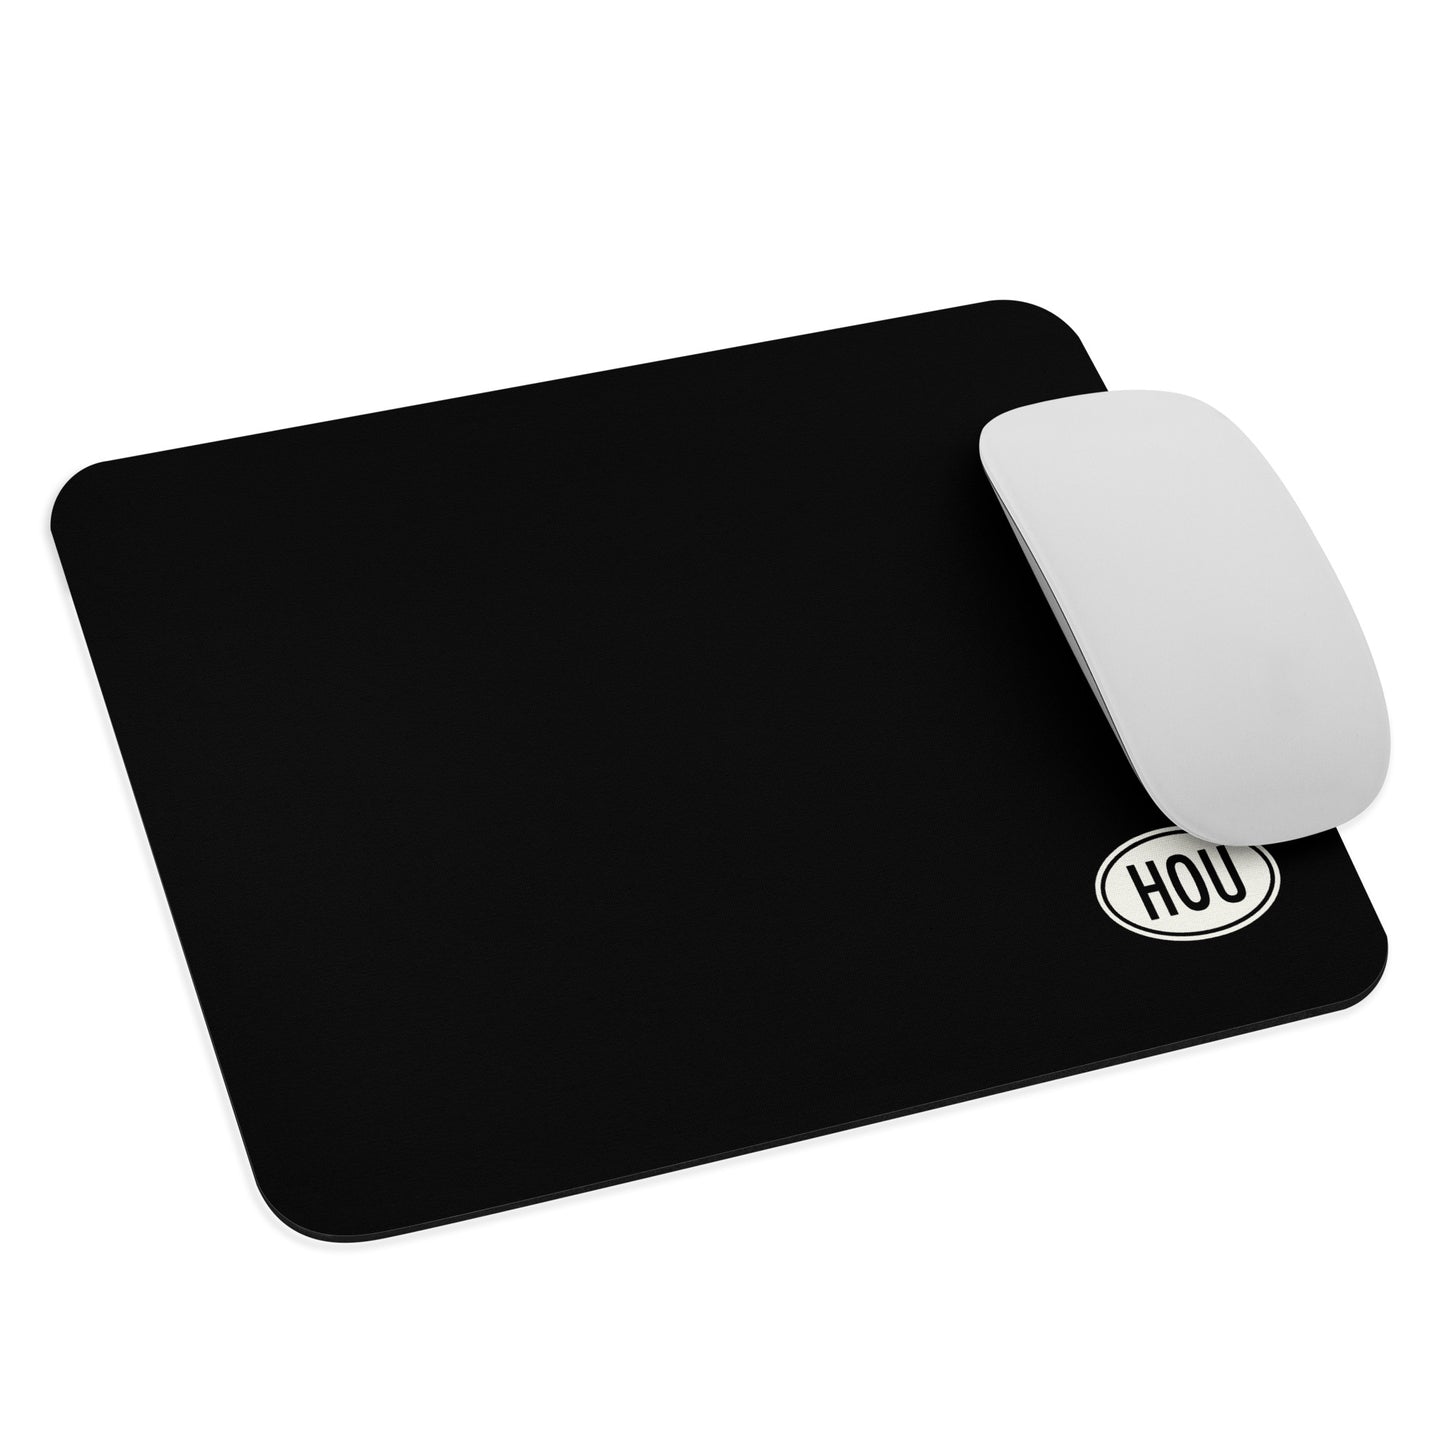 Unique Travel Gift Mouse Pad - White Oval • HOU Houston • YHM Designs - Image 03